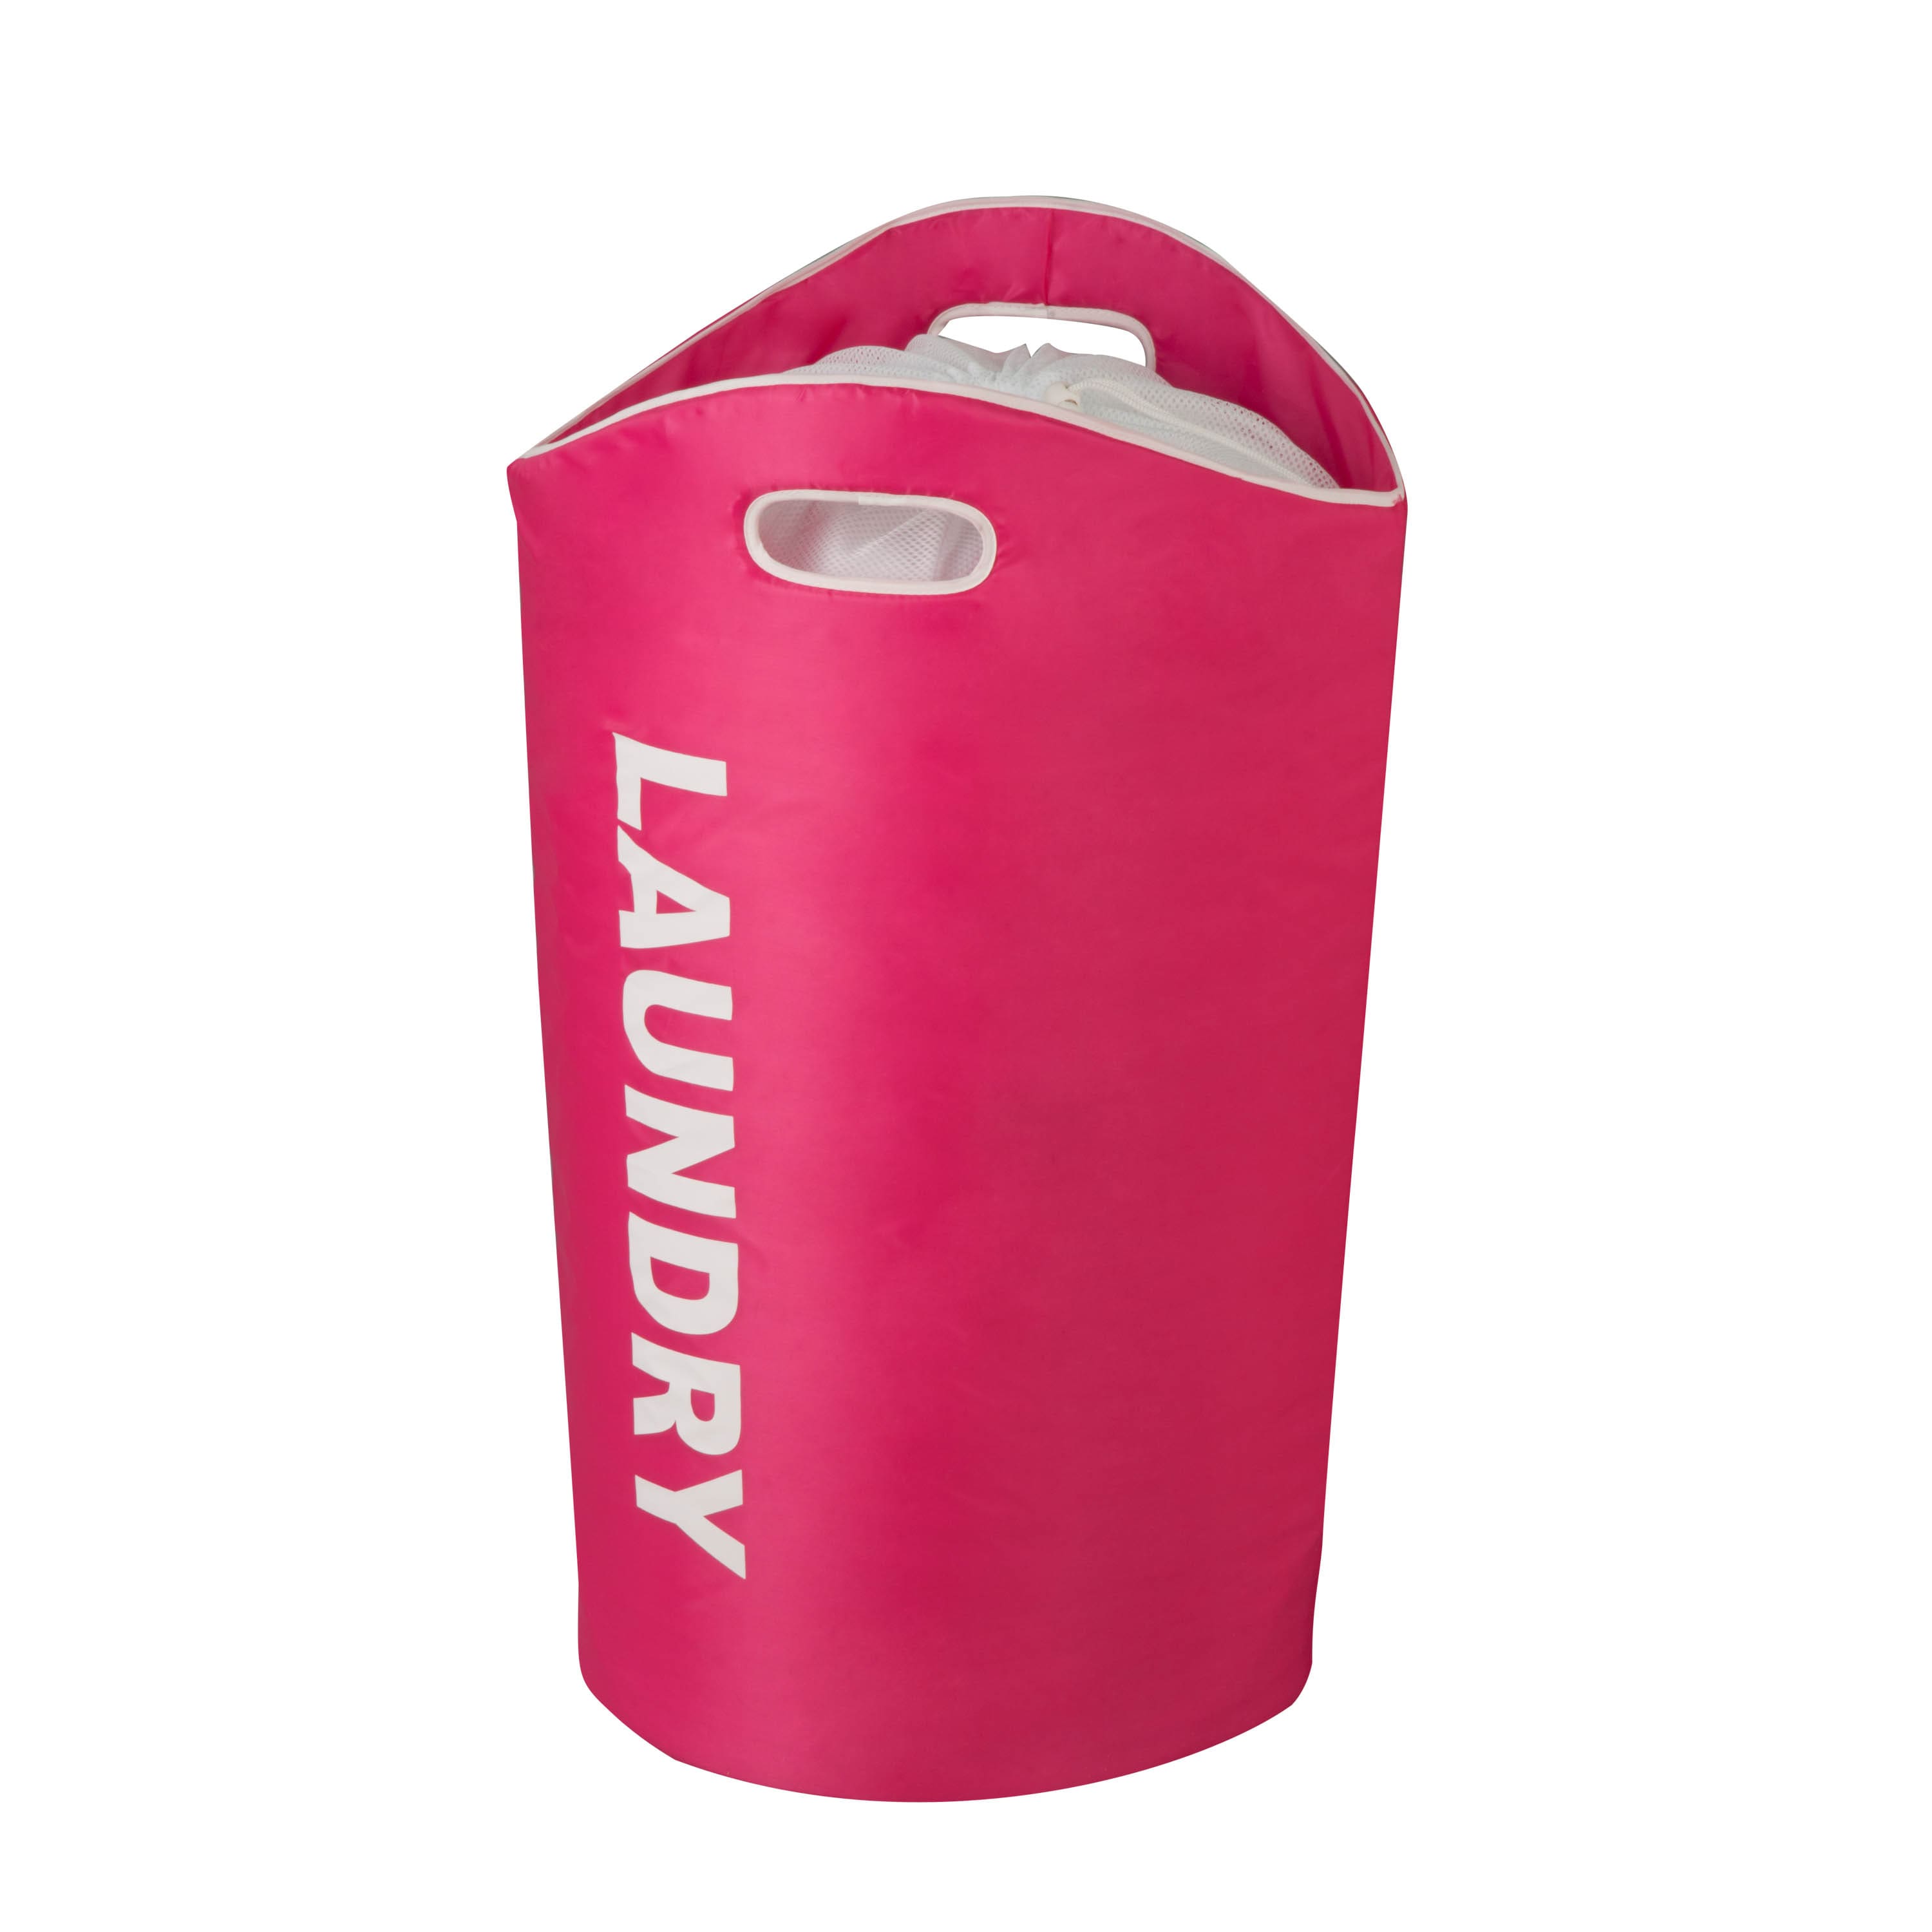 Honey Can Do Pink Graphic Laundry Basket